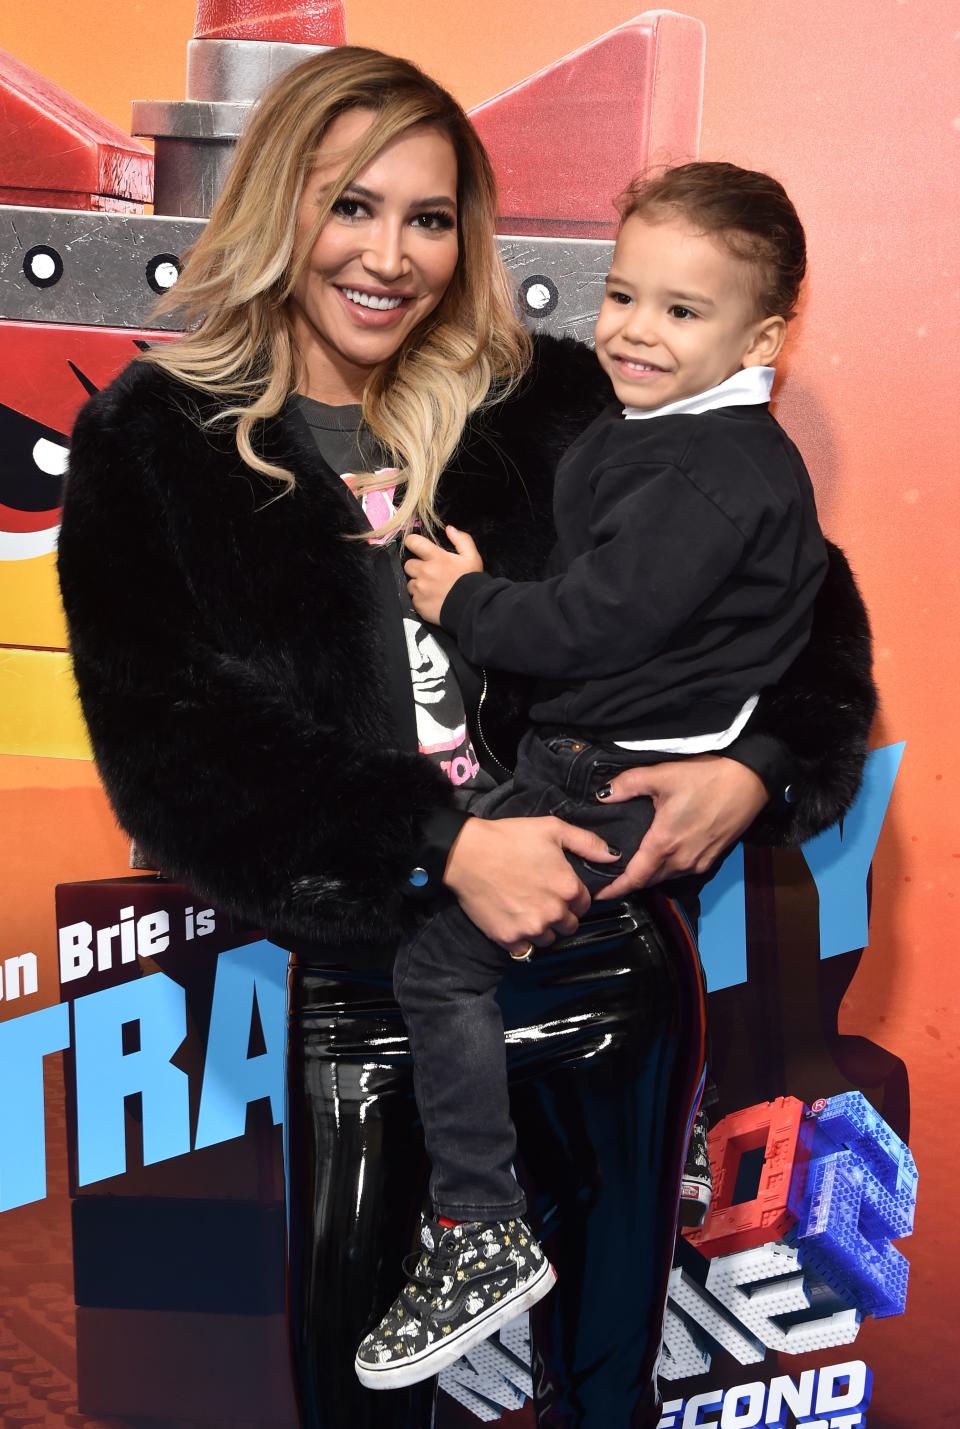 US actress Naya Rivera and son Josey Hollis Dorsey arrive for the premiere of "The Lego Movie 2: The Second Part" at the Regency Village theatre on February 2, 2019 in Westwood, California.